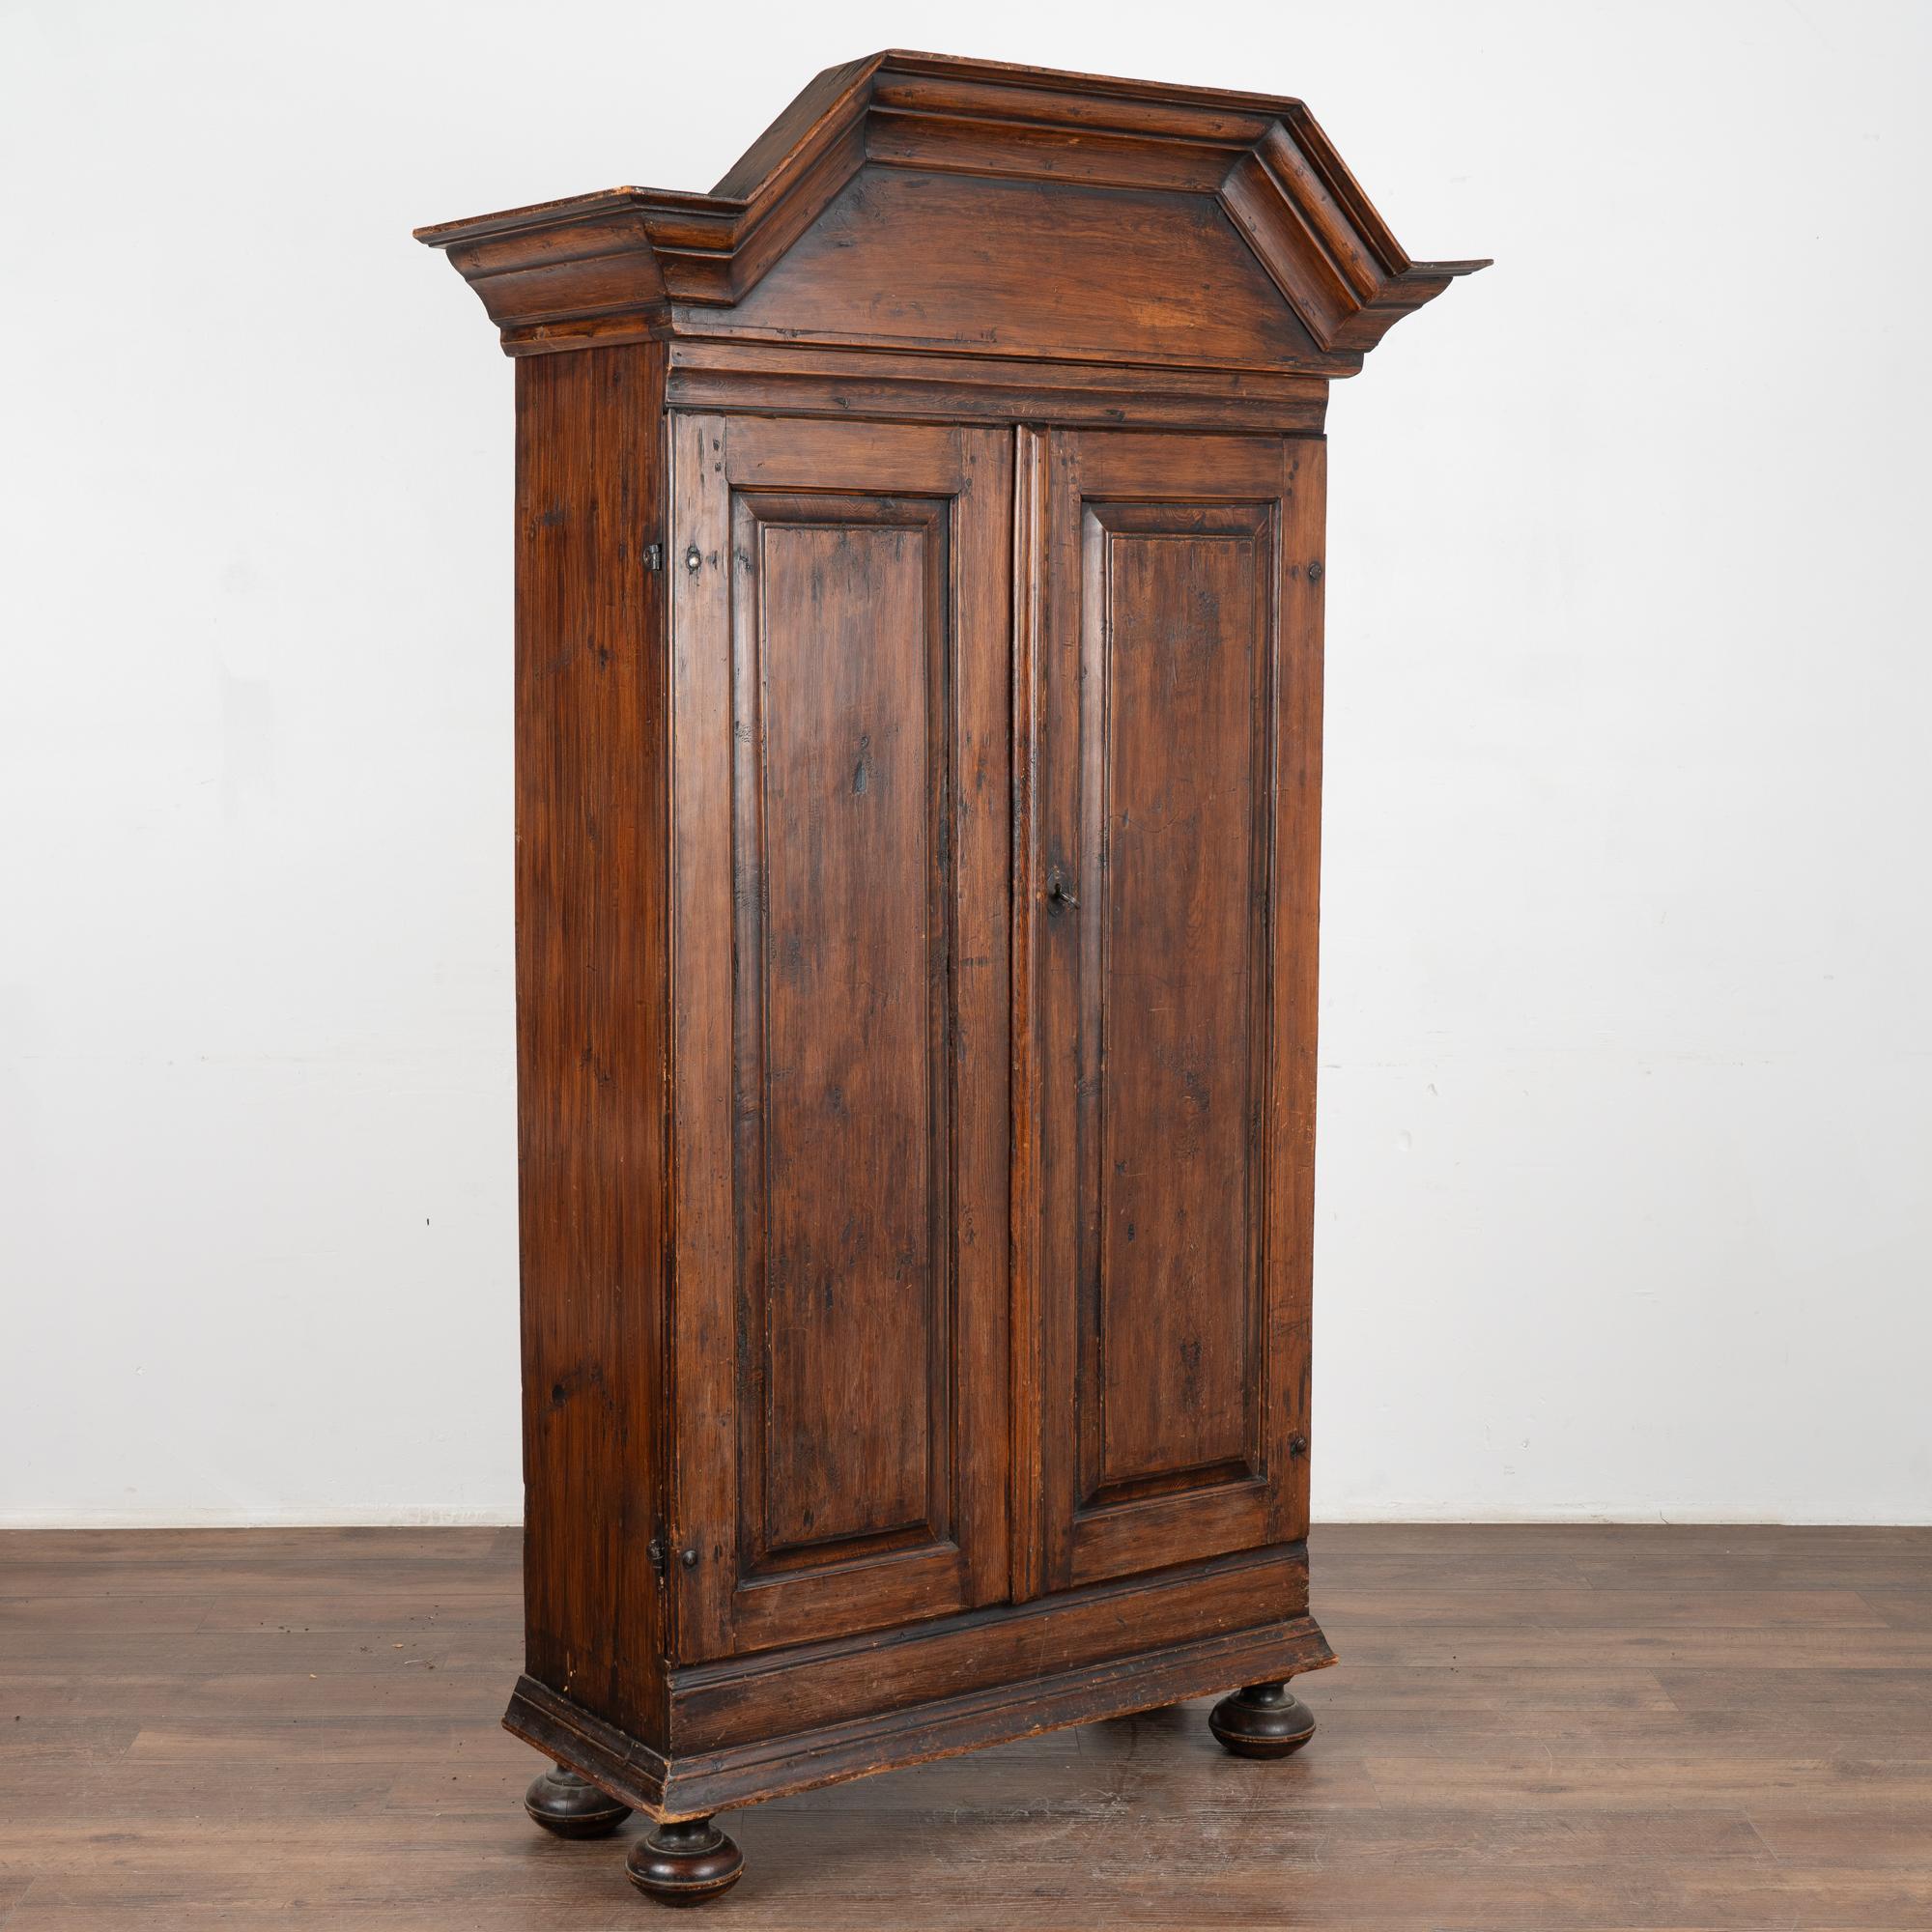 Lovely dark pine narrow armoire from the Swedish countryside which dates to the early 1800's.
Note the raised bonnet or 